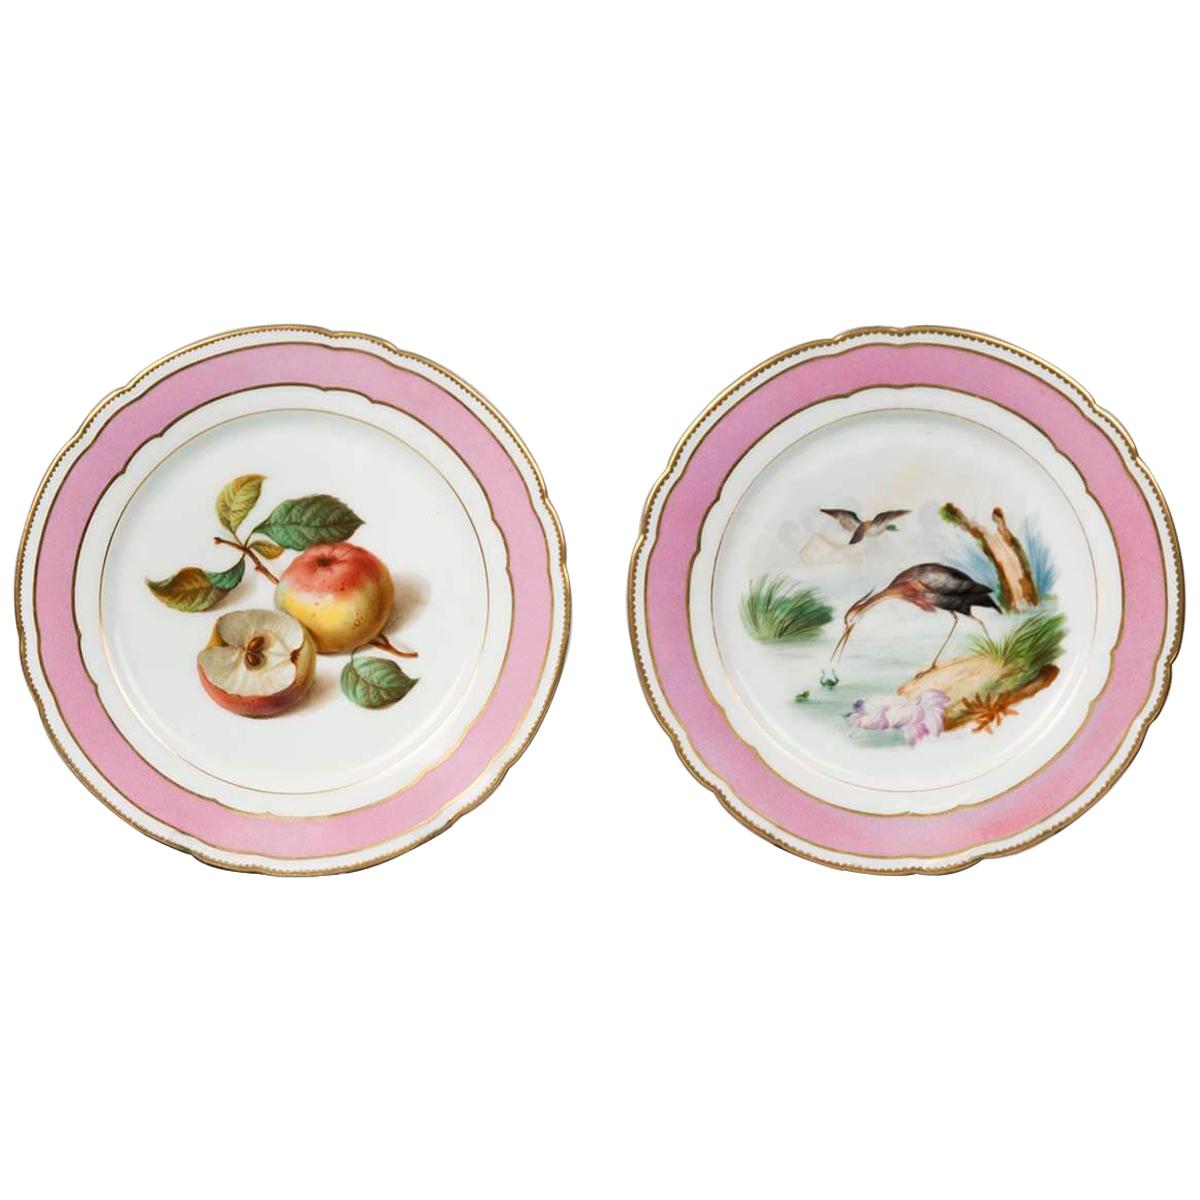 Pair of Painted Porcelain Cabinet Plates from Paris, 19th Century